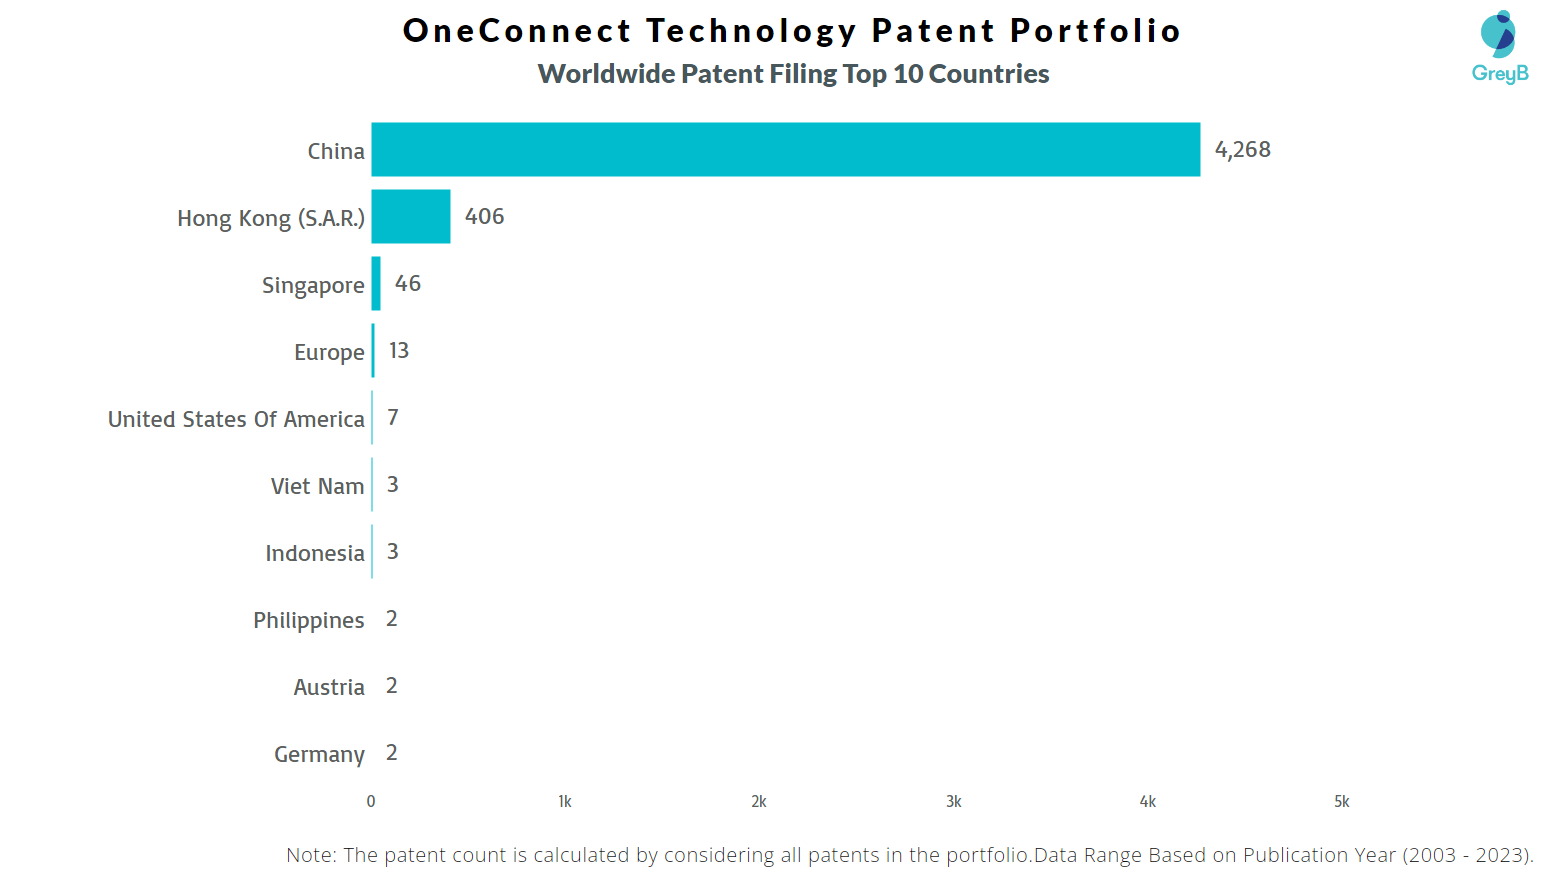 OneConnect Technology Worldwide Patent Filing